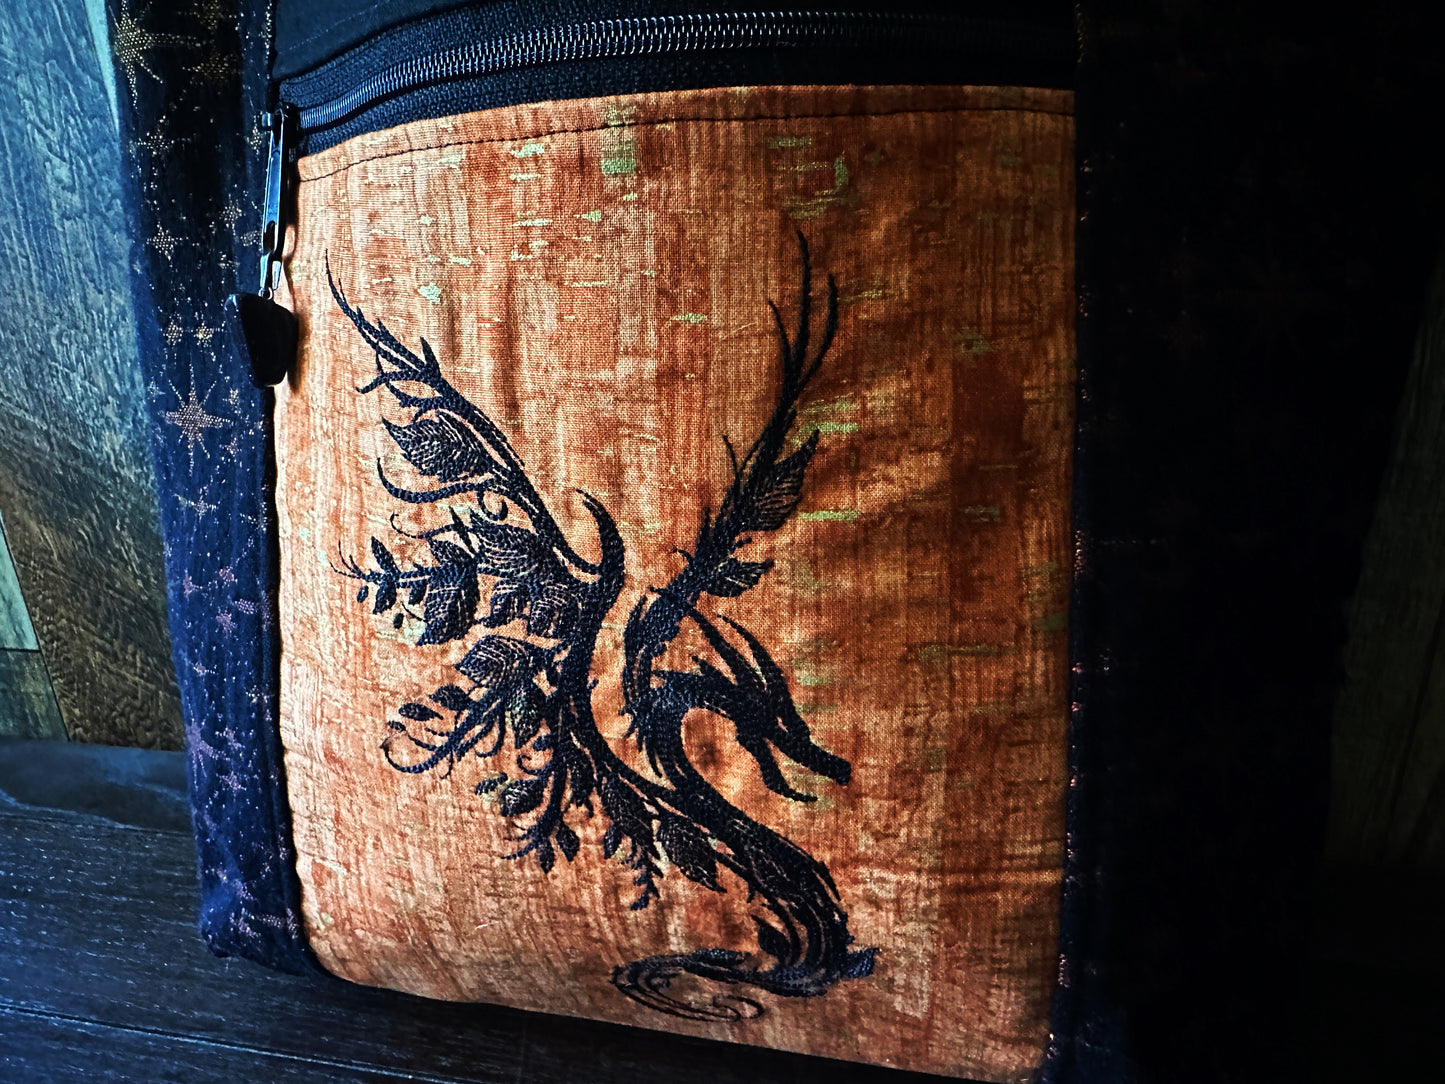 Dark Dragon Candlelight Large Firefly Project Bag